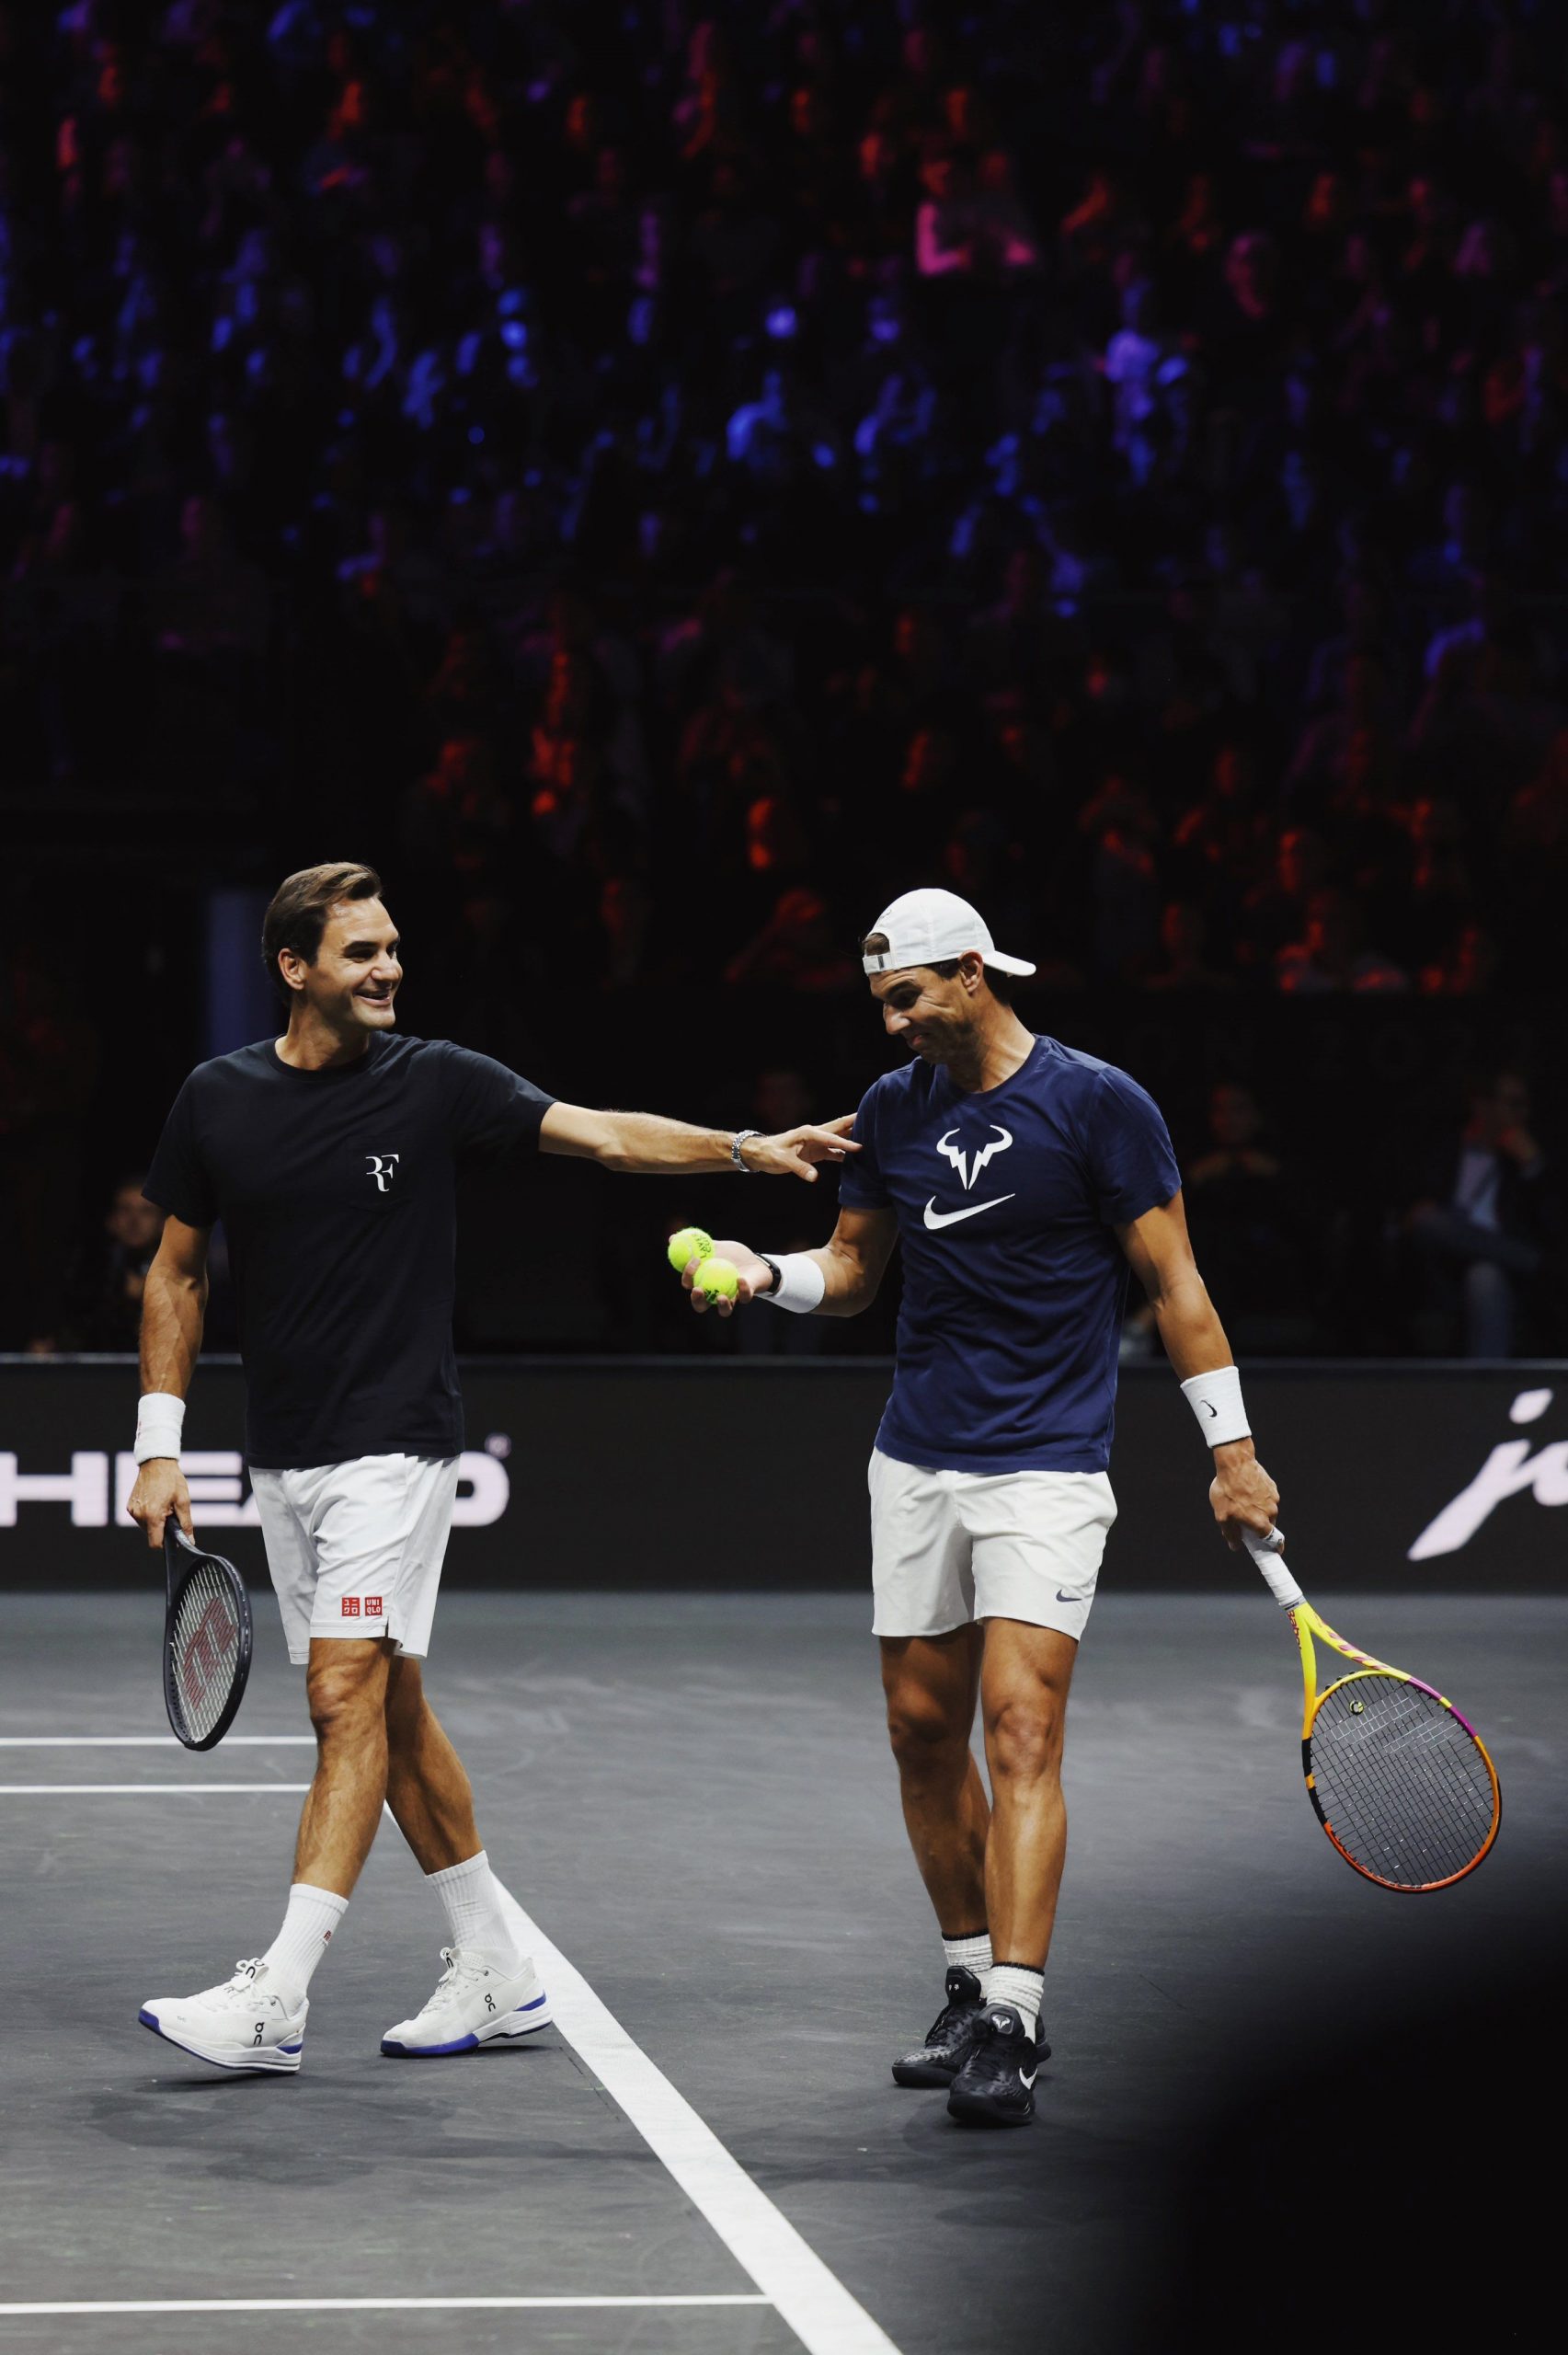 Laver Cup: What happened when Roger Federer, Rafael Nadal played doubles in 2017